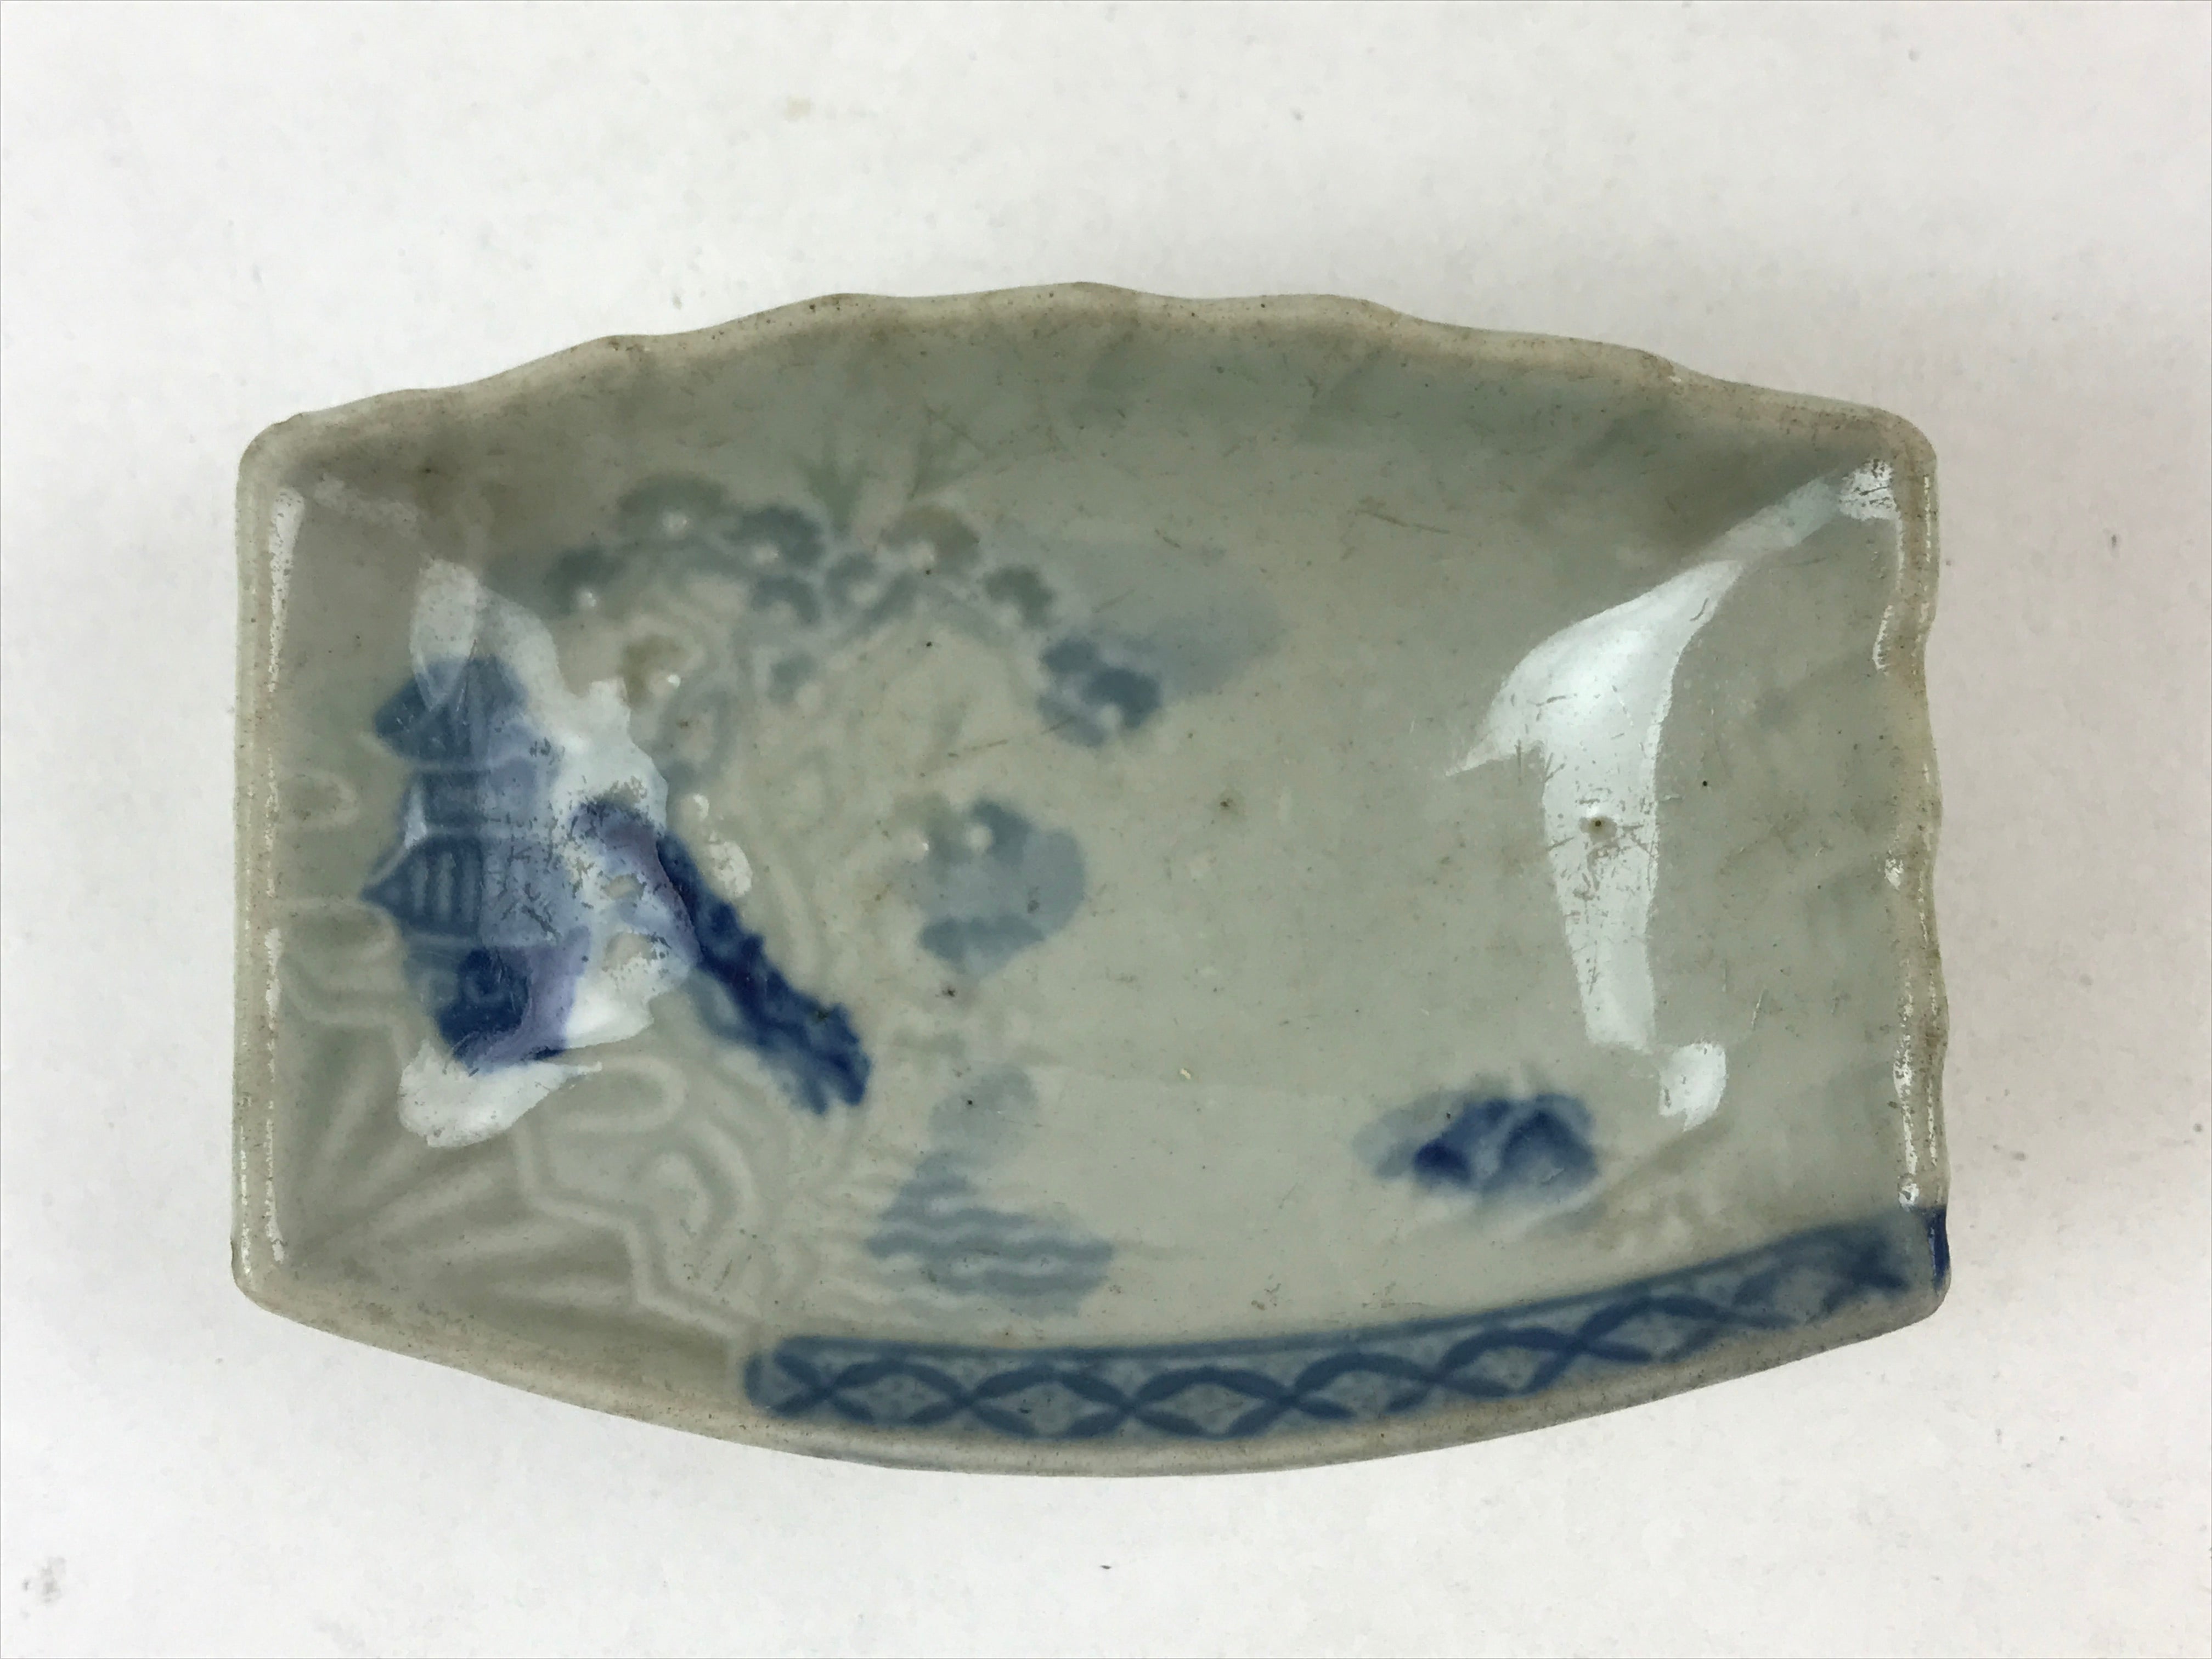 Japanese Porcelain Soy Sauce Dish Seiji Vtg Small Dipping Bowl Blue Temple PY518